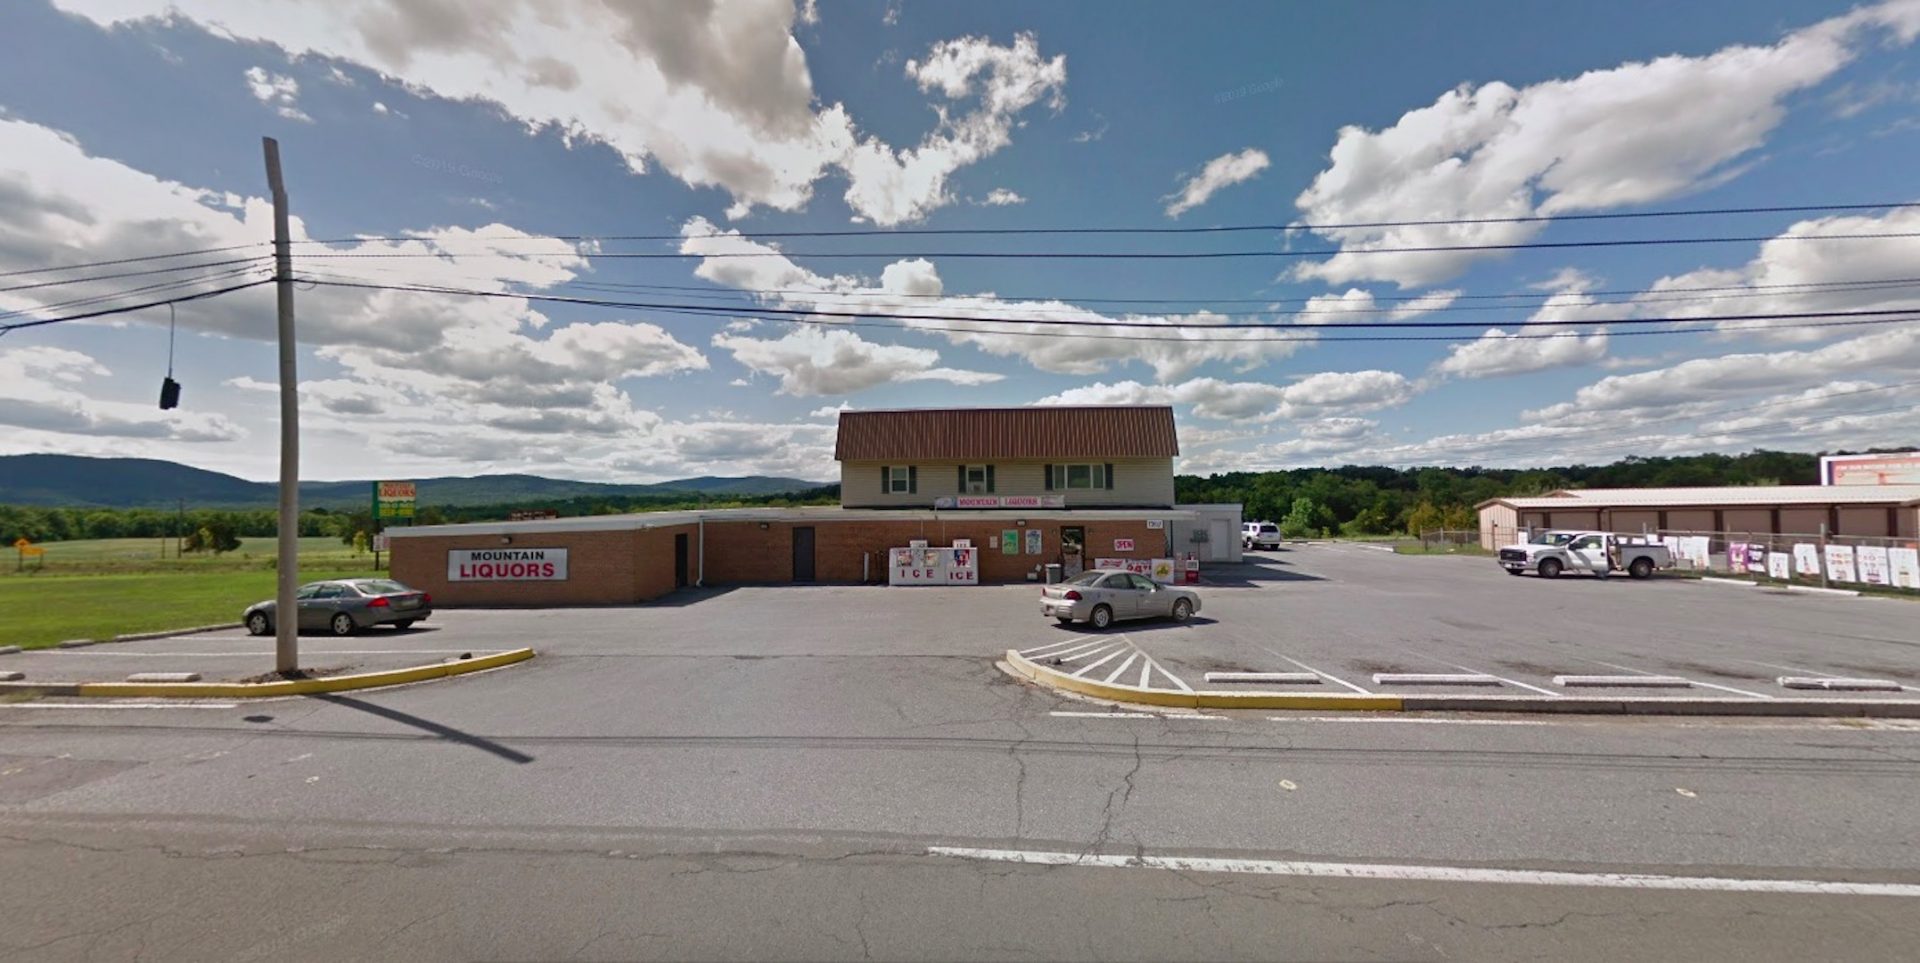 Mountain Liquors, in Emmittsburg, Md., is one of many over-the-border liquor stores benefitting from Pennsylvania's decision to shut down its liquor stores because of the coronavirus pandemic.